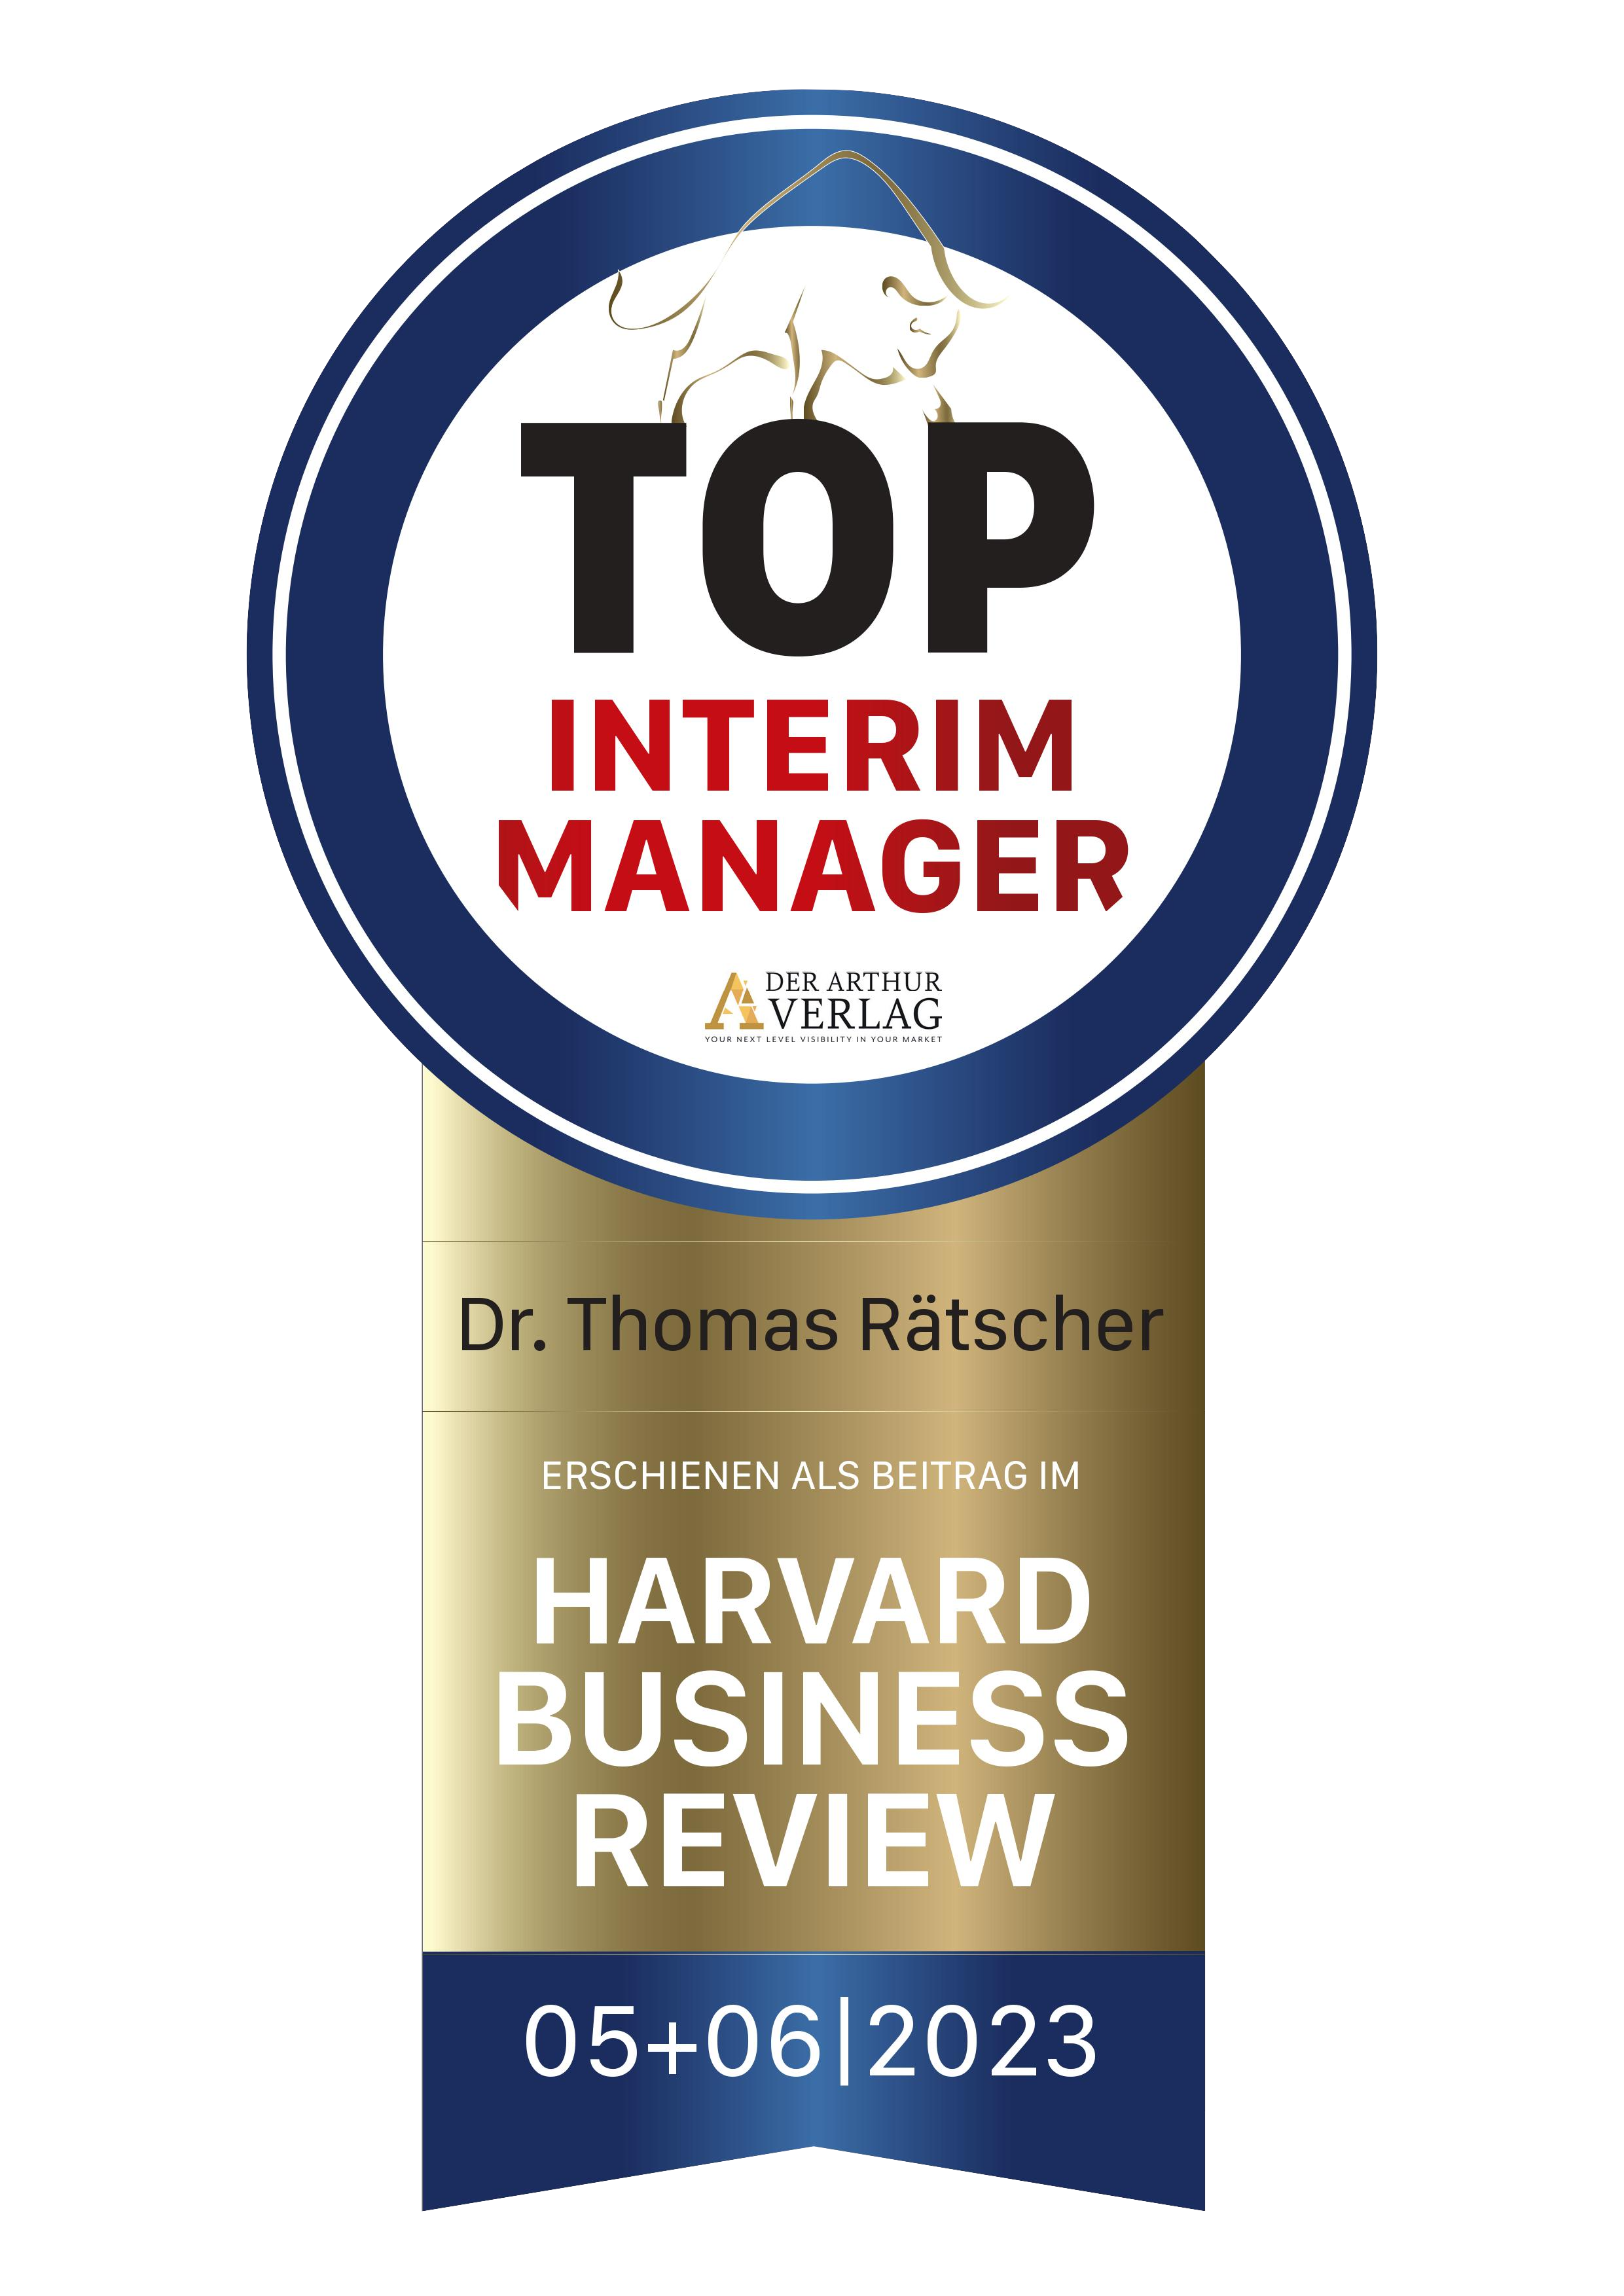 Featured image for “Meet 1 of the most important interim managers”